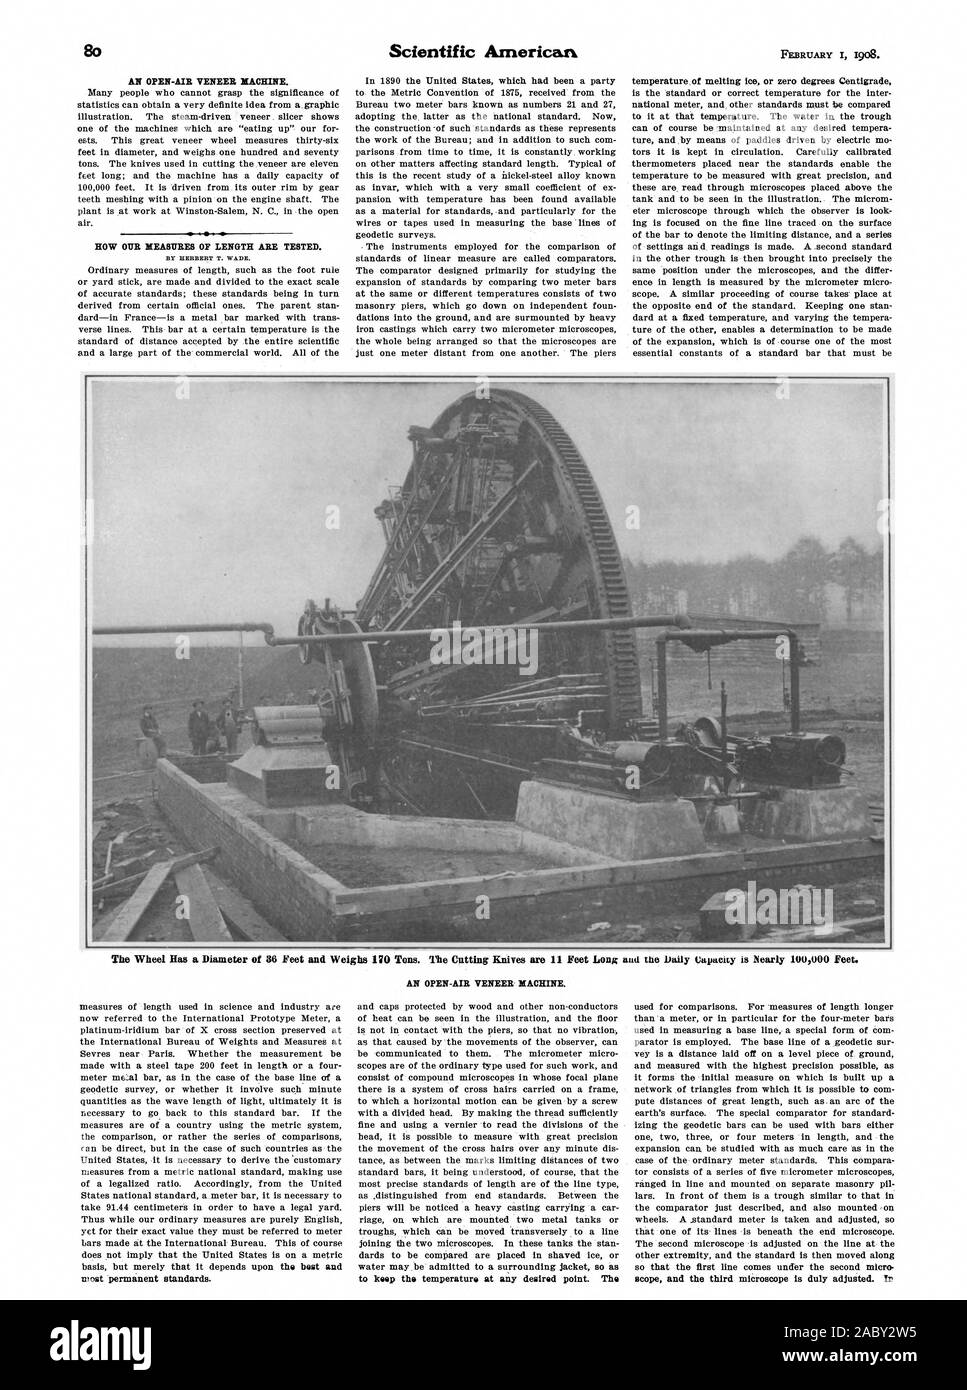 AN OPEN-AIR VENEER MACHINE. HOW OUR MEASURES OF LENGTH ARE TESTED. BY HERBERT T. WADE. The Wheel Has a Diameter of 36 Feet and Weighs 0 Tons. The Cutting Knives are  Feet Long anti the Daily Capacity is Nearly 100000 Feet. AN OPEN-AIR VENEER MACHINE. to keep the temperature at any desired point. The, scientific american, 1908-02-01 Stock Photo